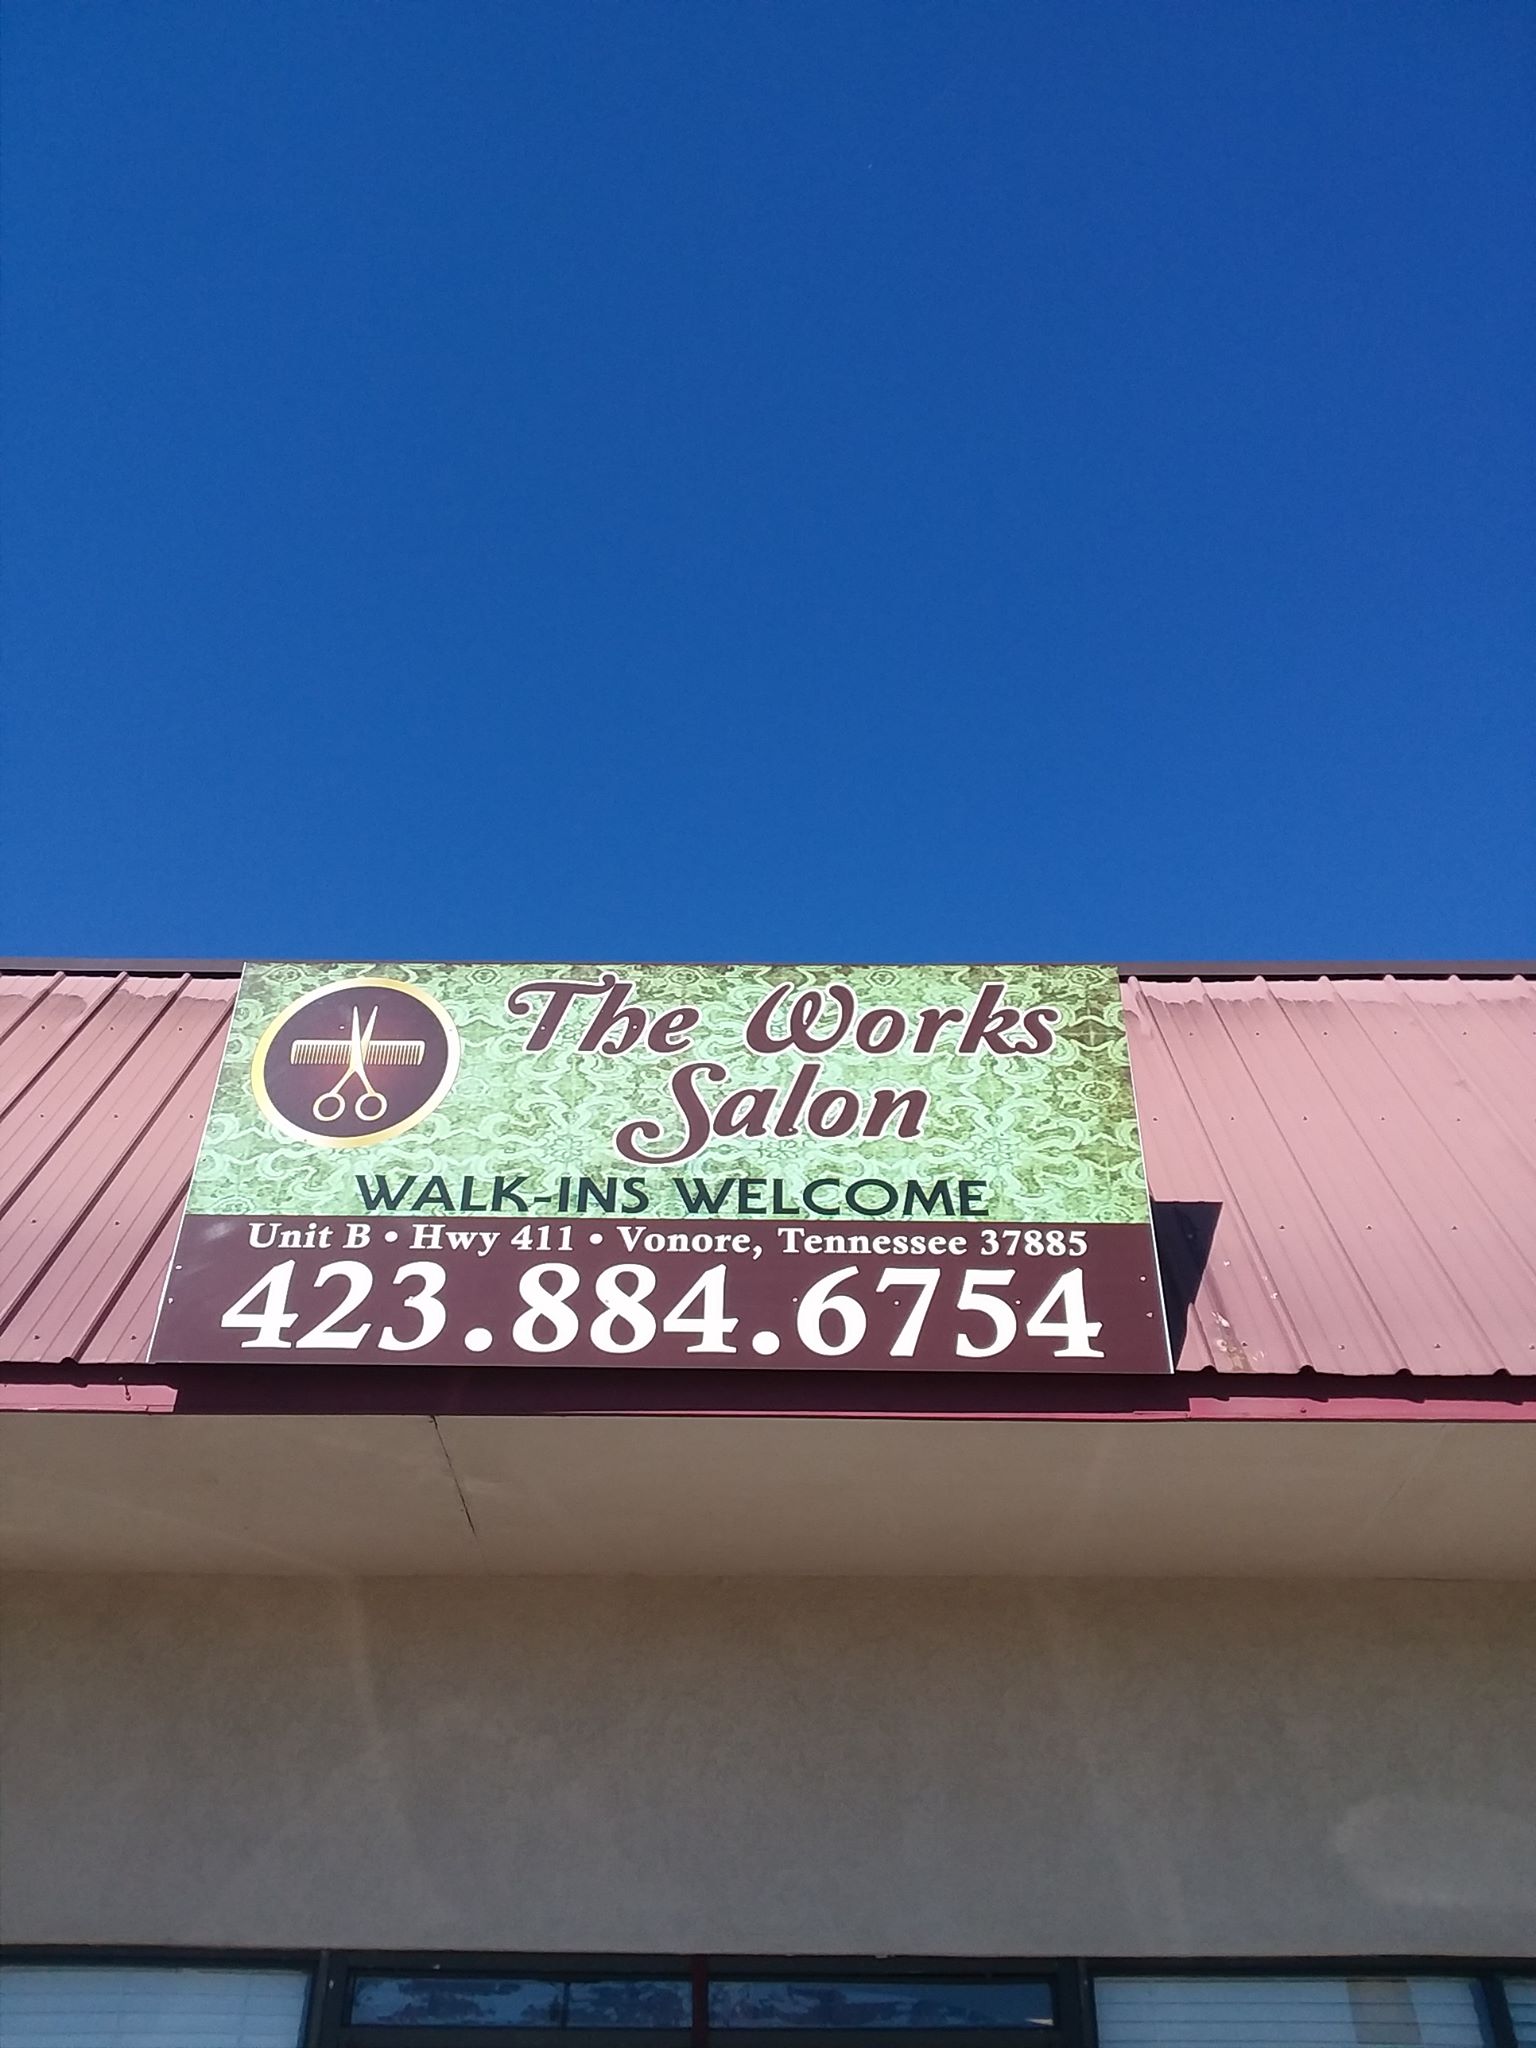 The Works Salon 1000 Hwy 411, Vonore Tennessee 37885